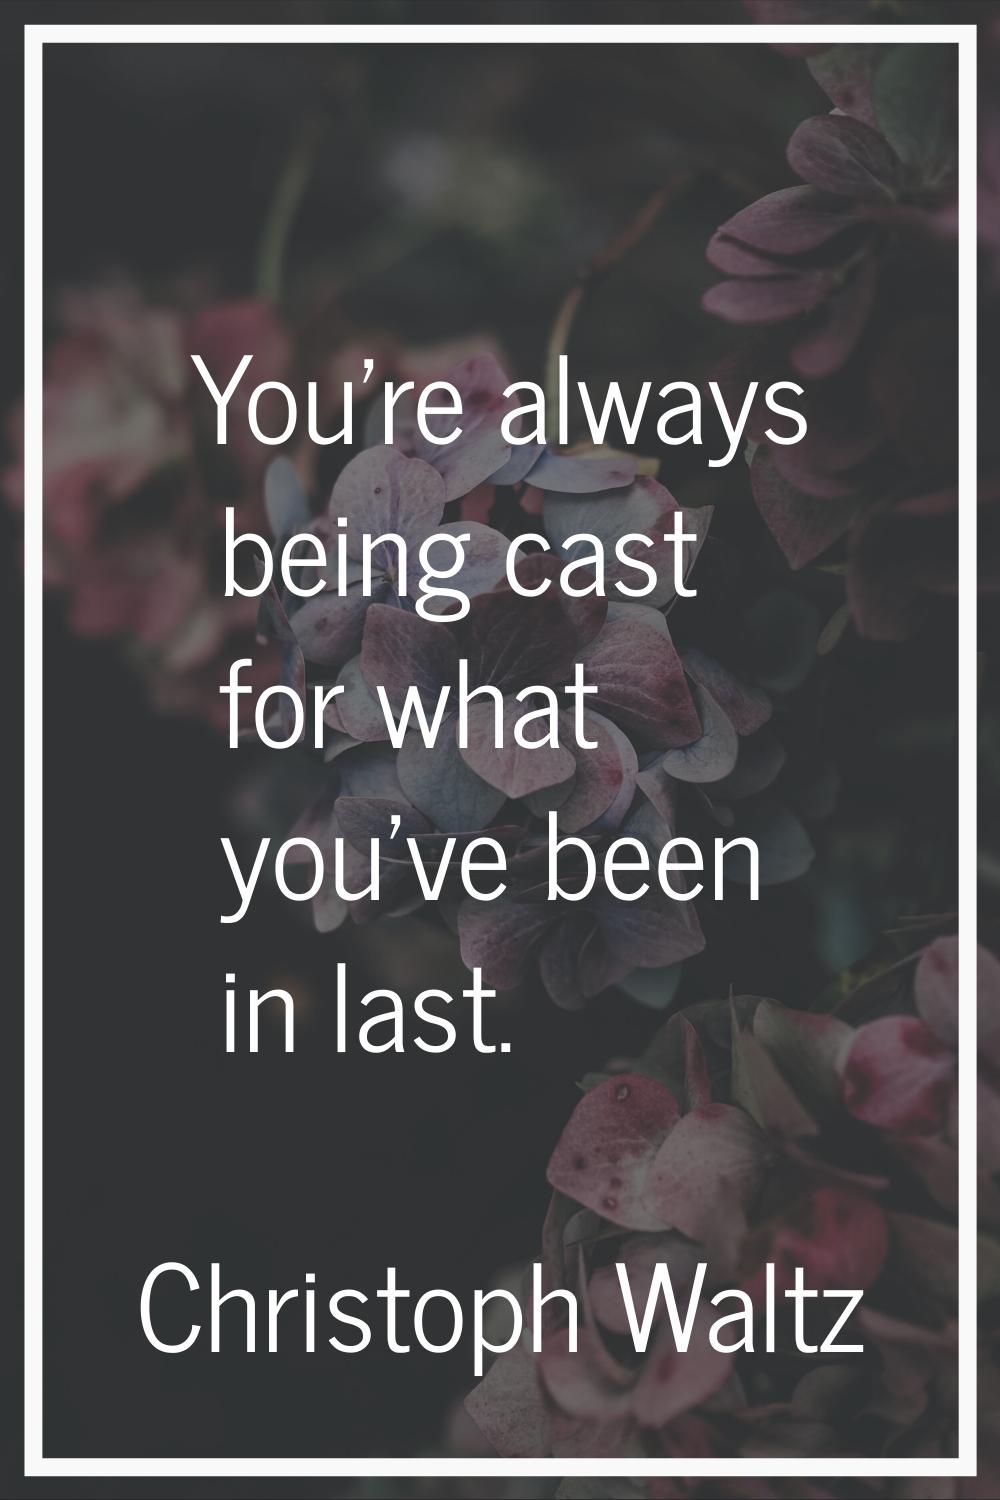 You're always being cast for what you've been in last.